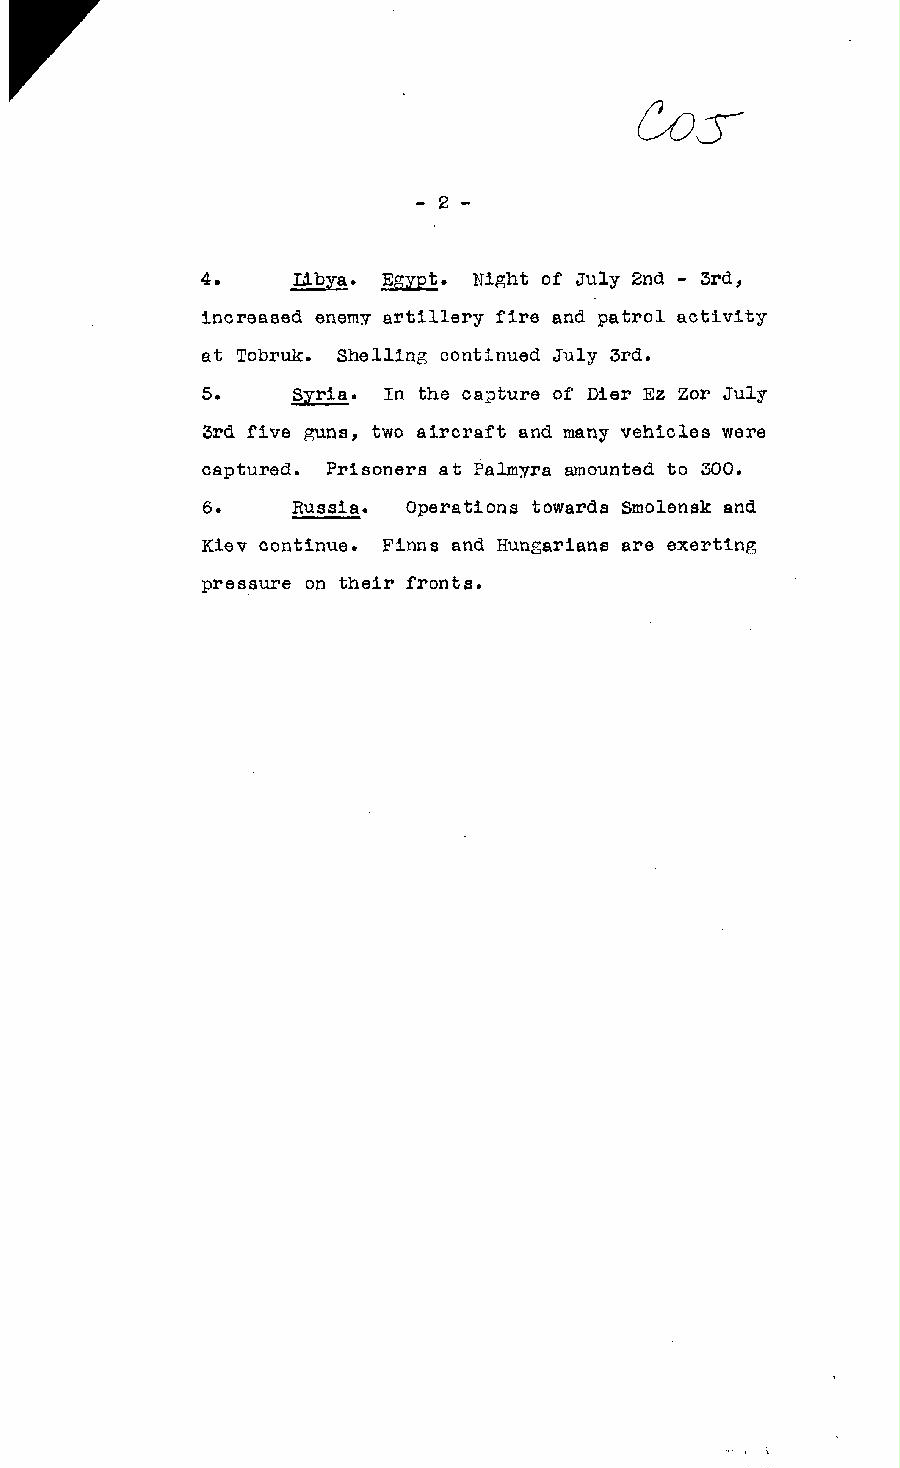 [a322c05.jpg] - Cont-Report on military situation 7/5/41